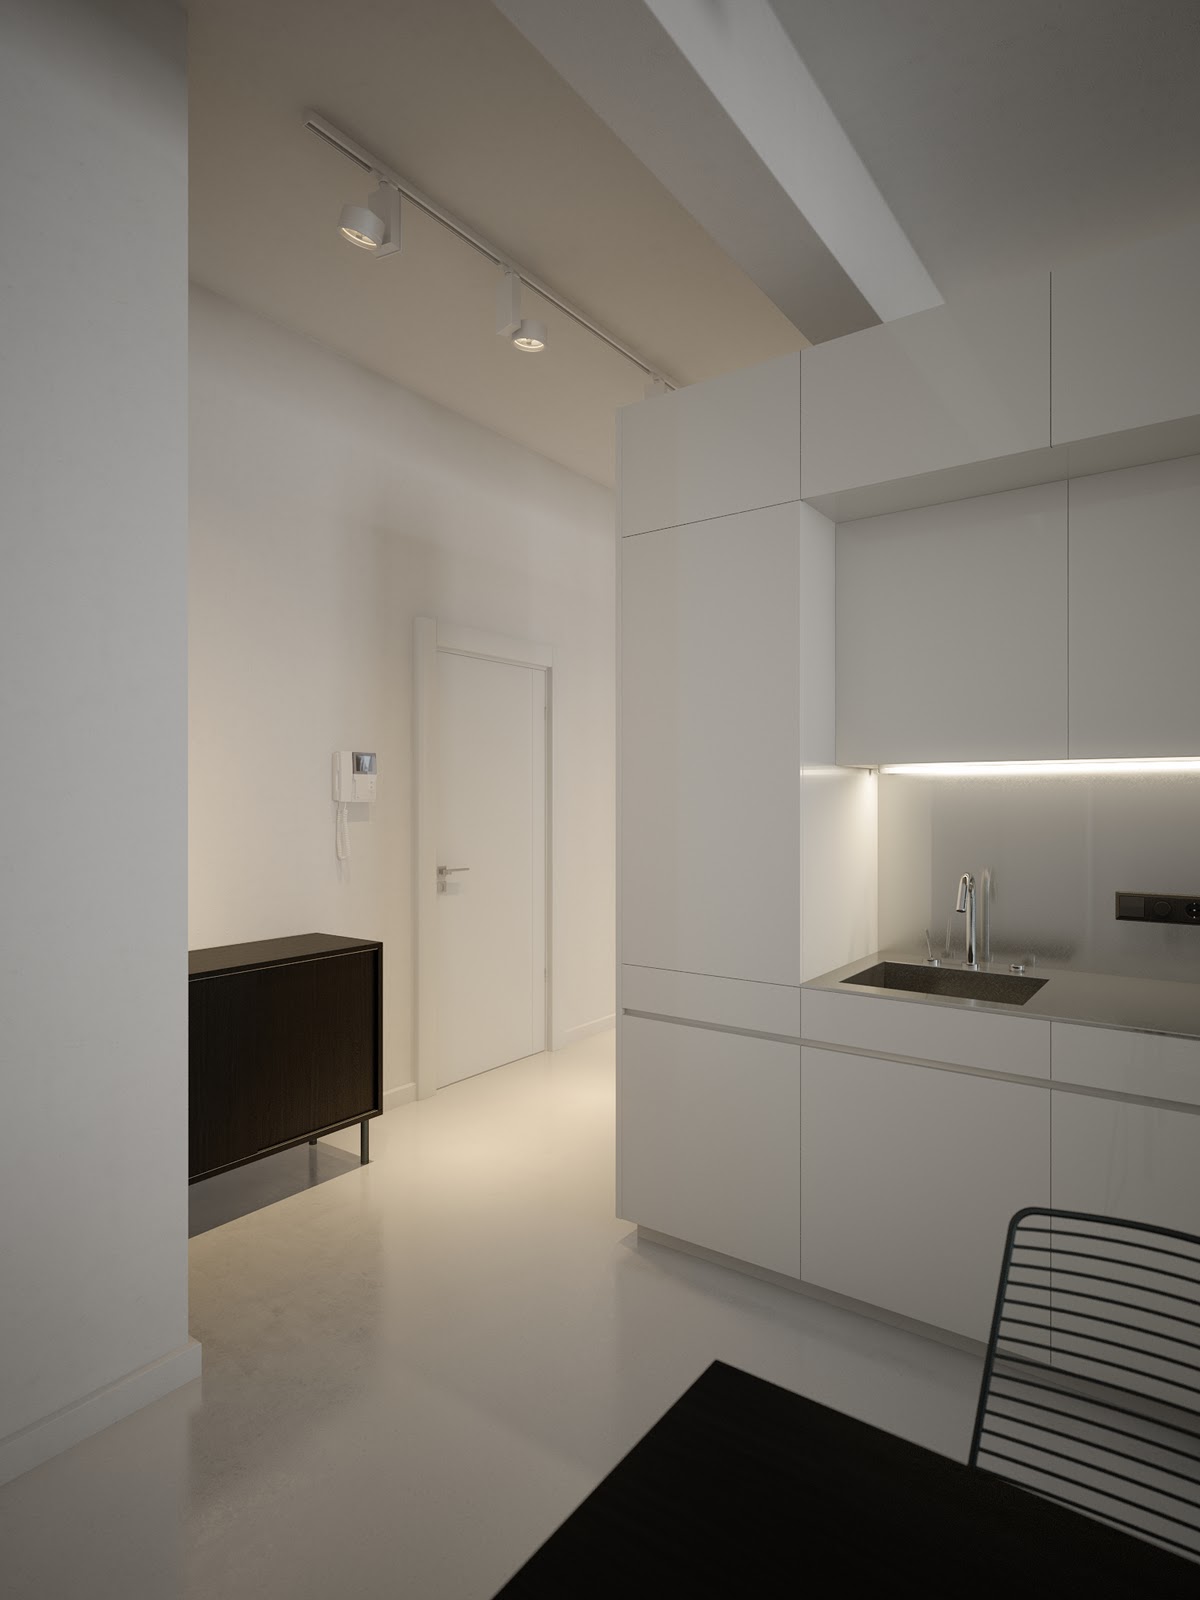 The White Slab Front Kitchen Units Are Situated In A Single Run